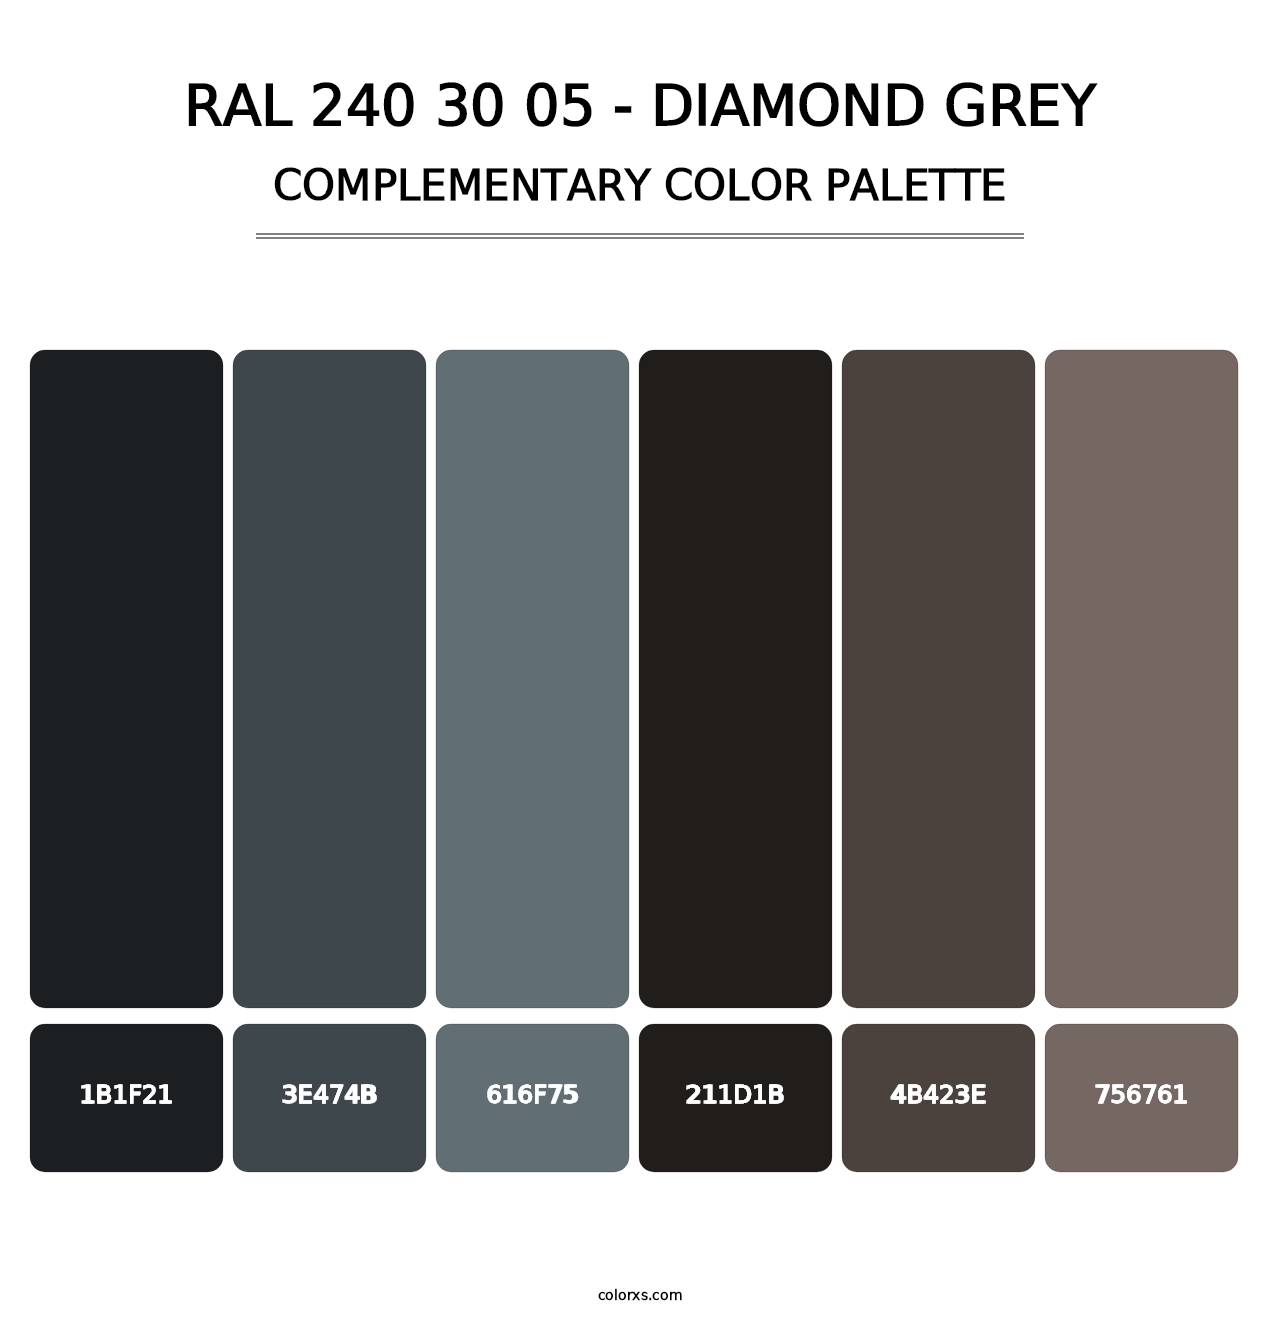 RAL 240 30 05 - Diamond Grey - Complementary Color Palette